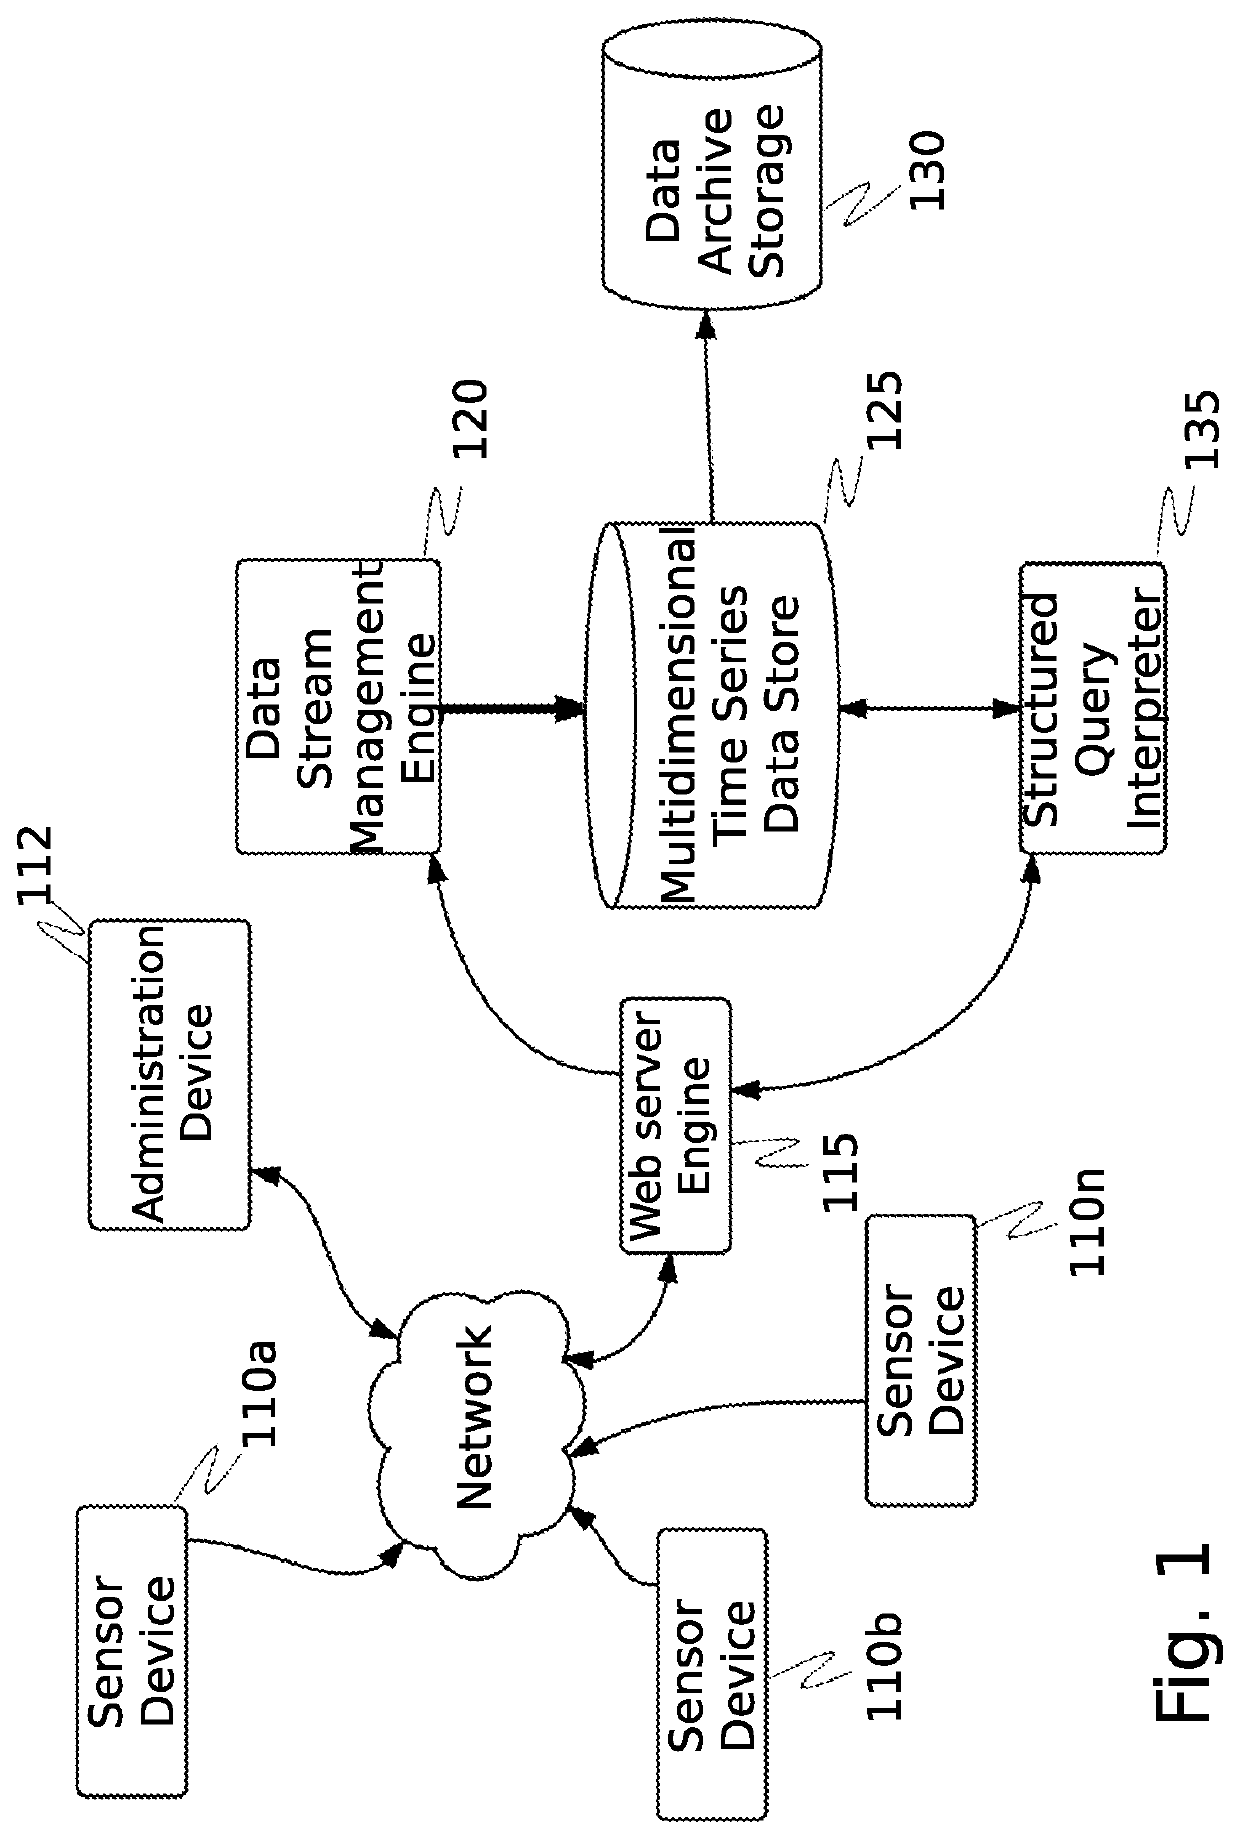 System and method for trigger-based scanning of cyber-physical assets